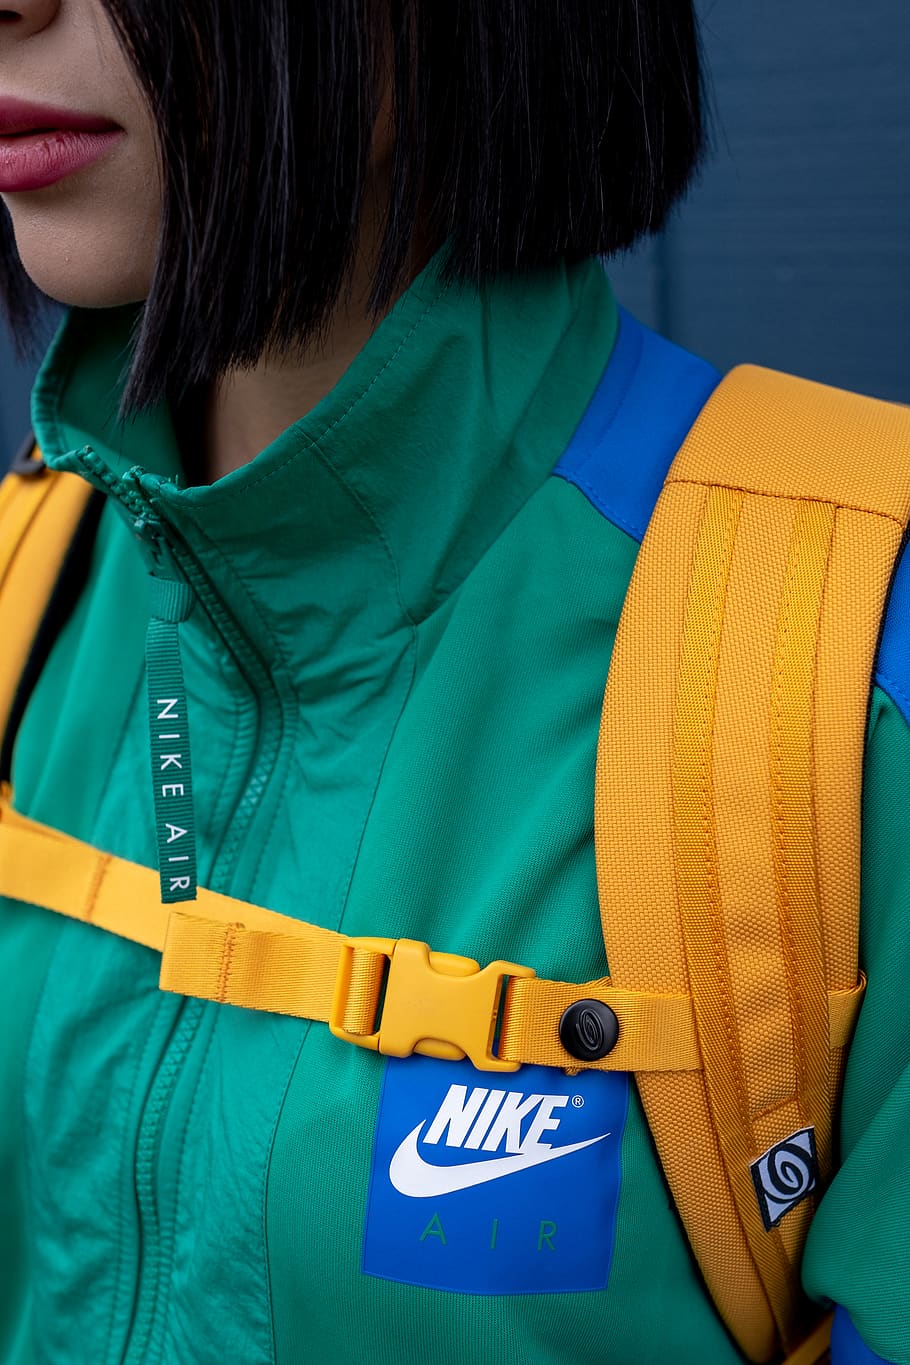 Woman Wearing Green Nike Zip Top and Yellow Backpack, adult, brand trademark